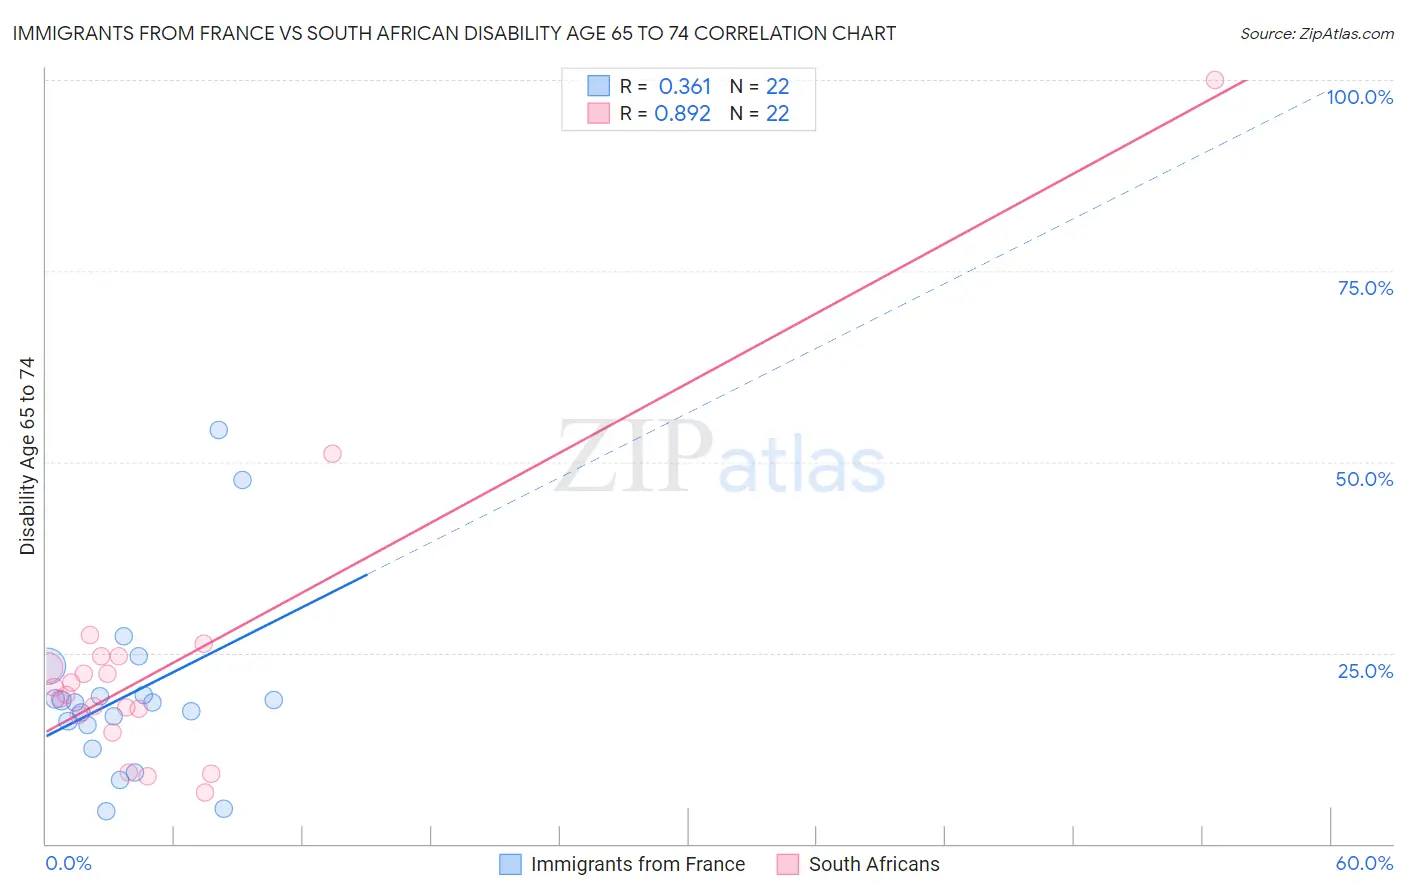 Immigrants from France vs South African Disability Age 65 to 74